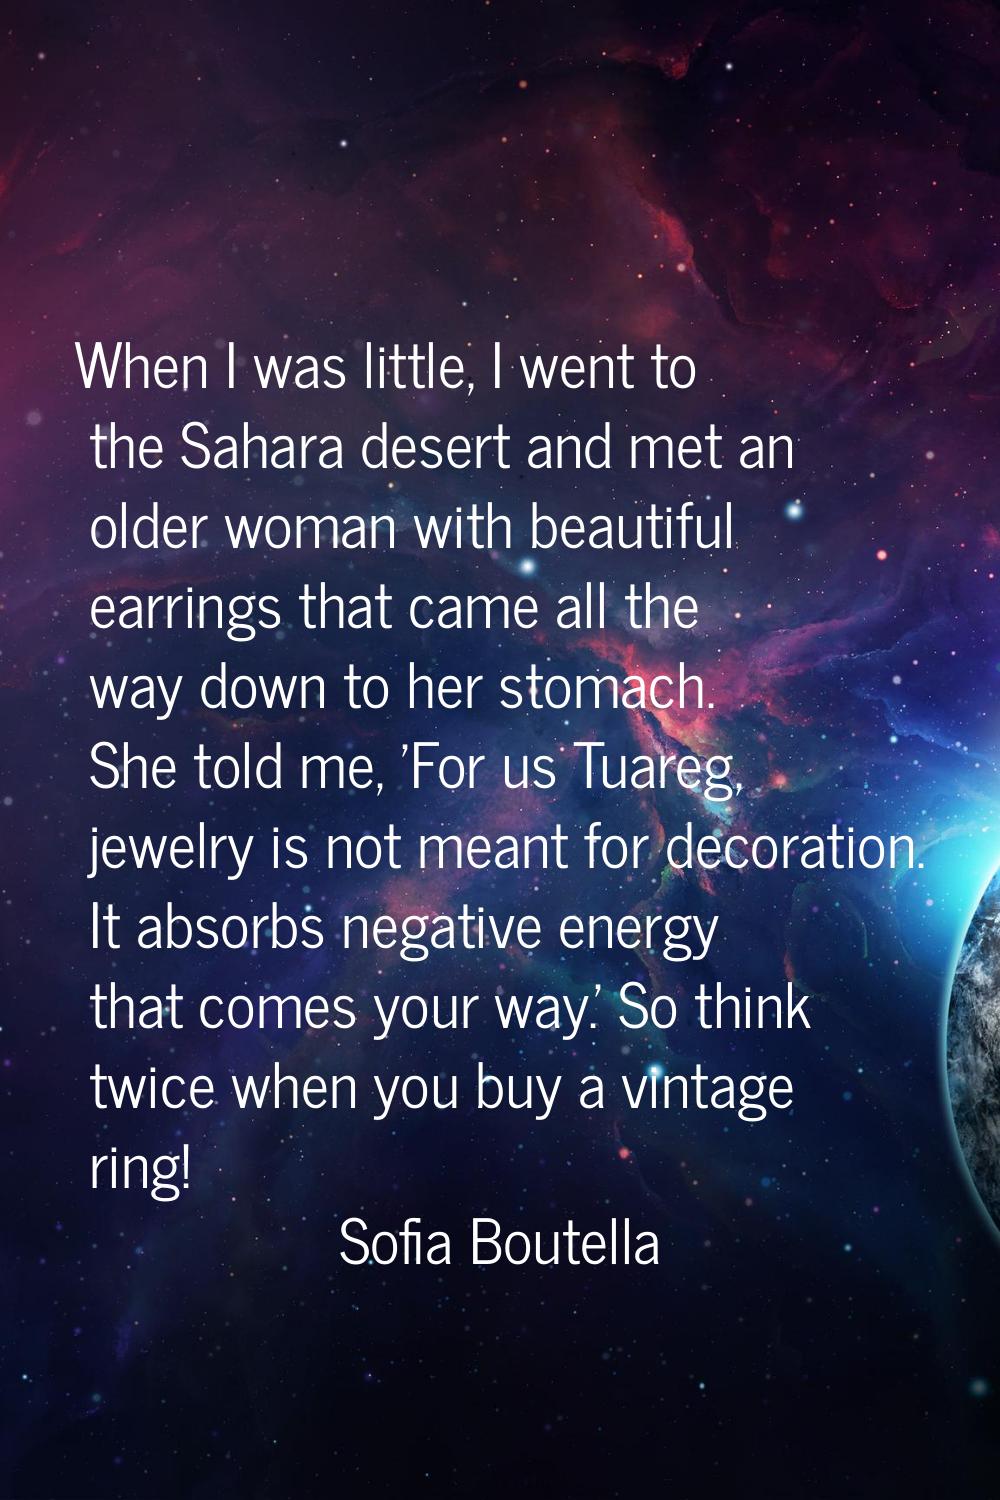 When I was little, I went to the Sahara desert and met an older woman with beautiful earrings that 